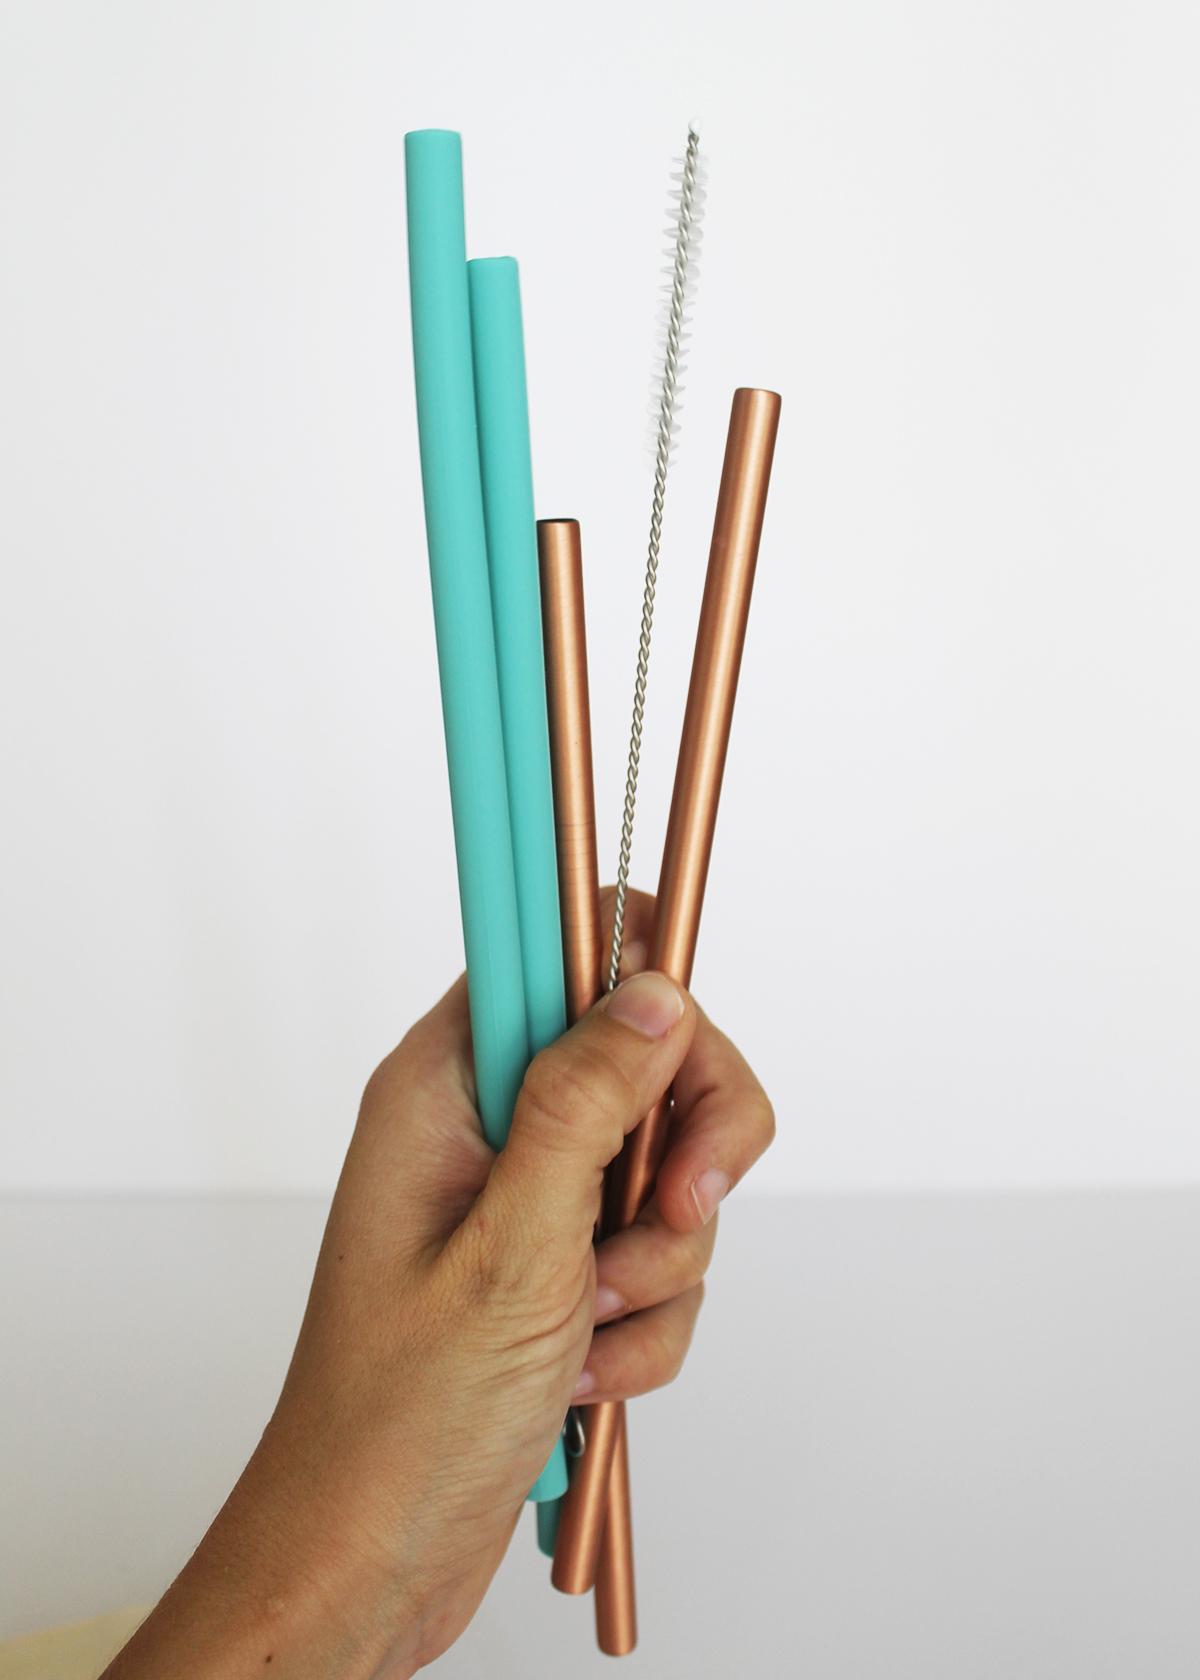 Learn how to clean reusable straws